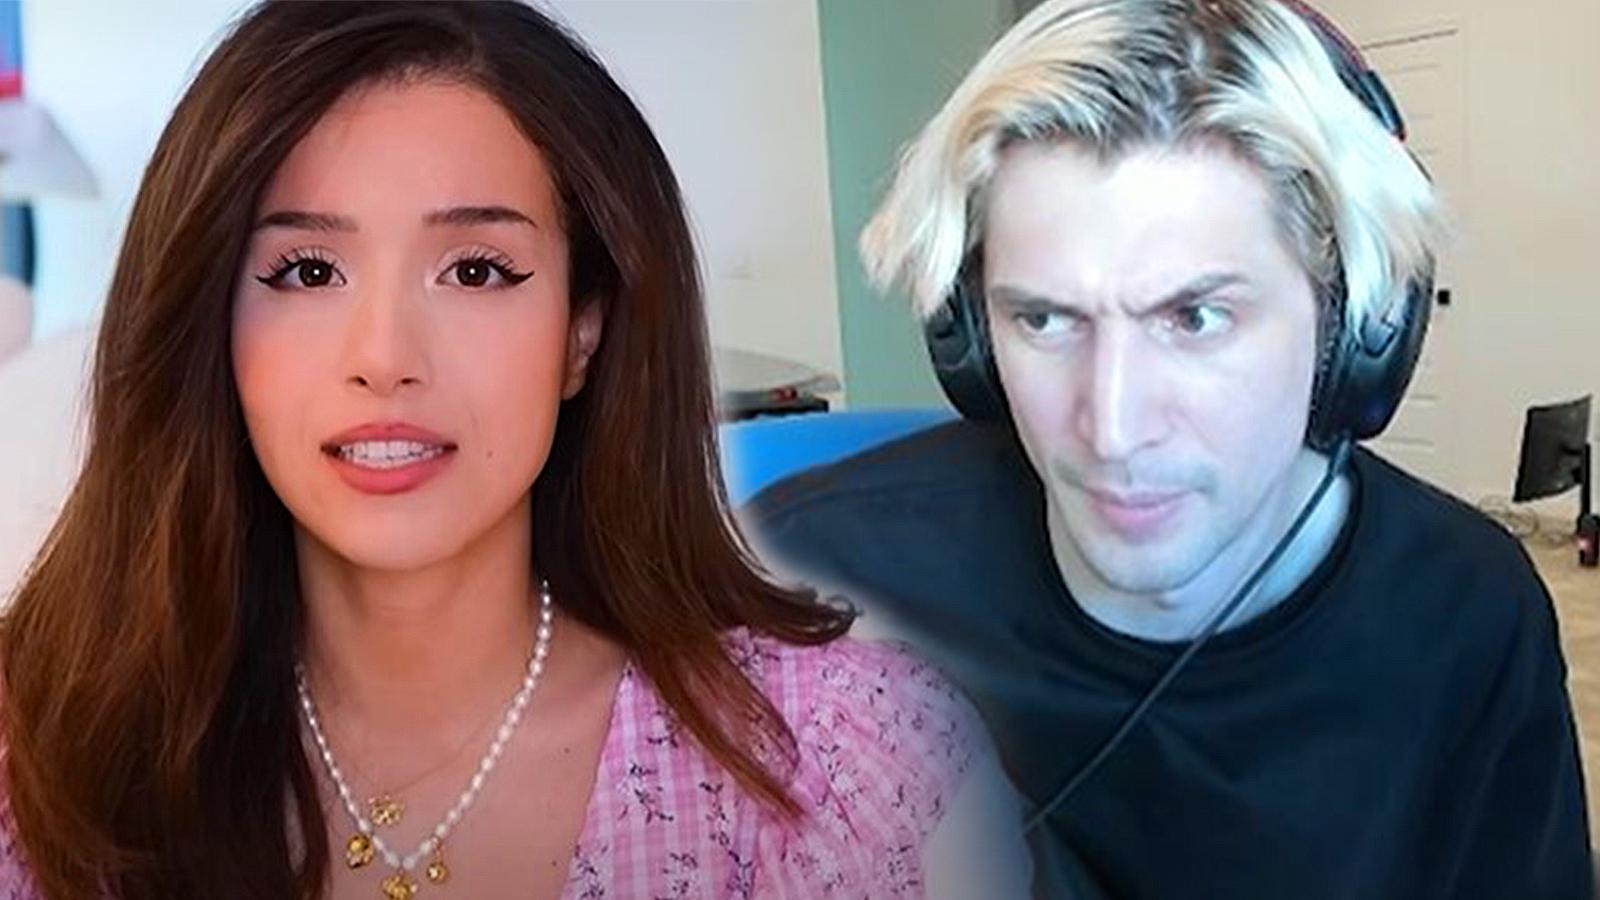 xqc-says-men-made-fun-of-more-looks-pokimane-twitch